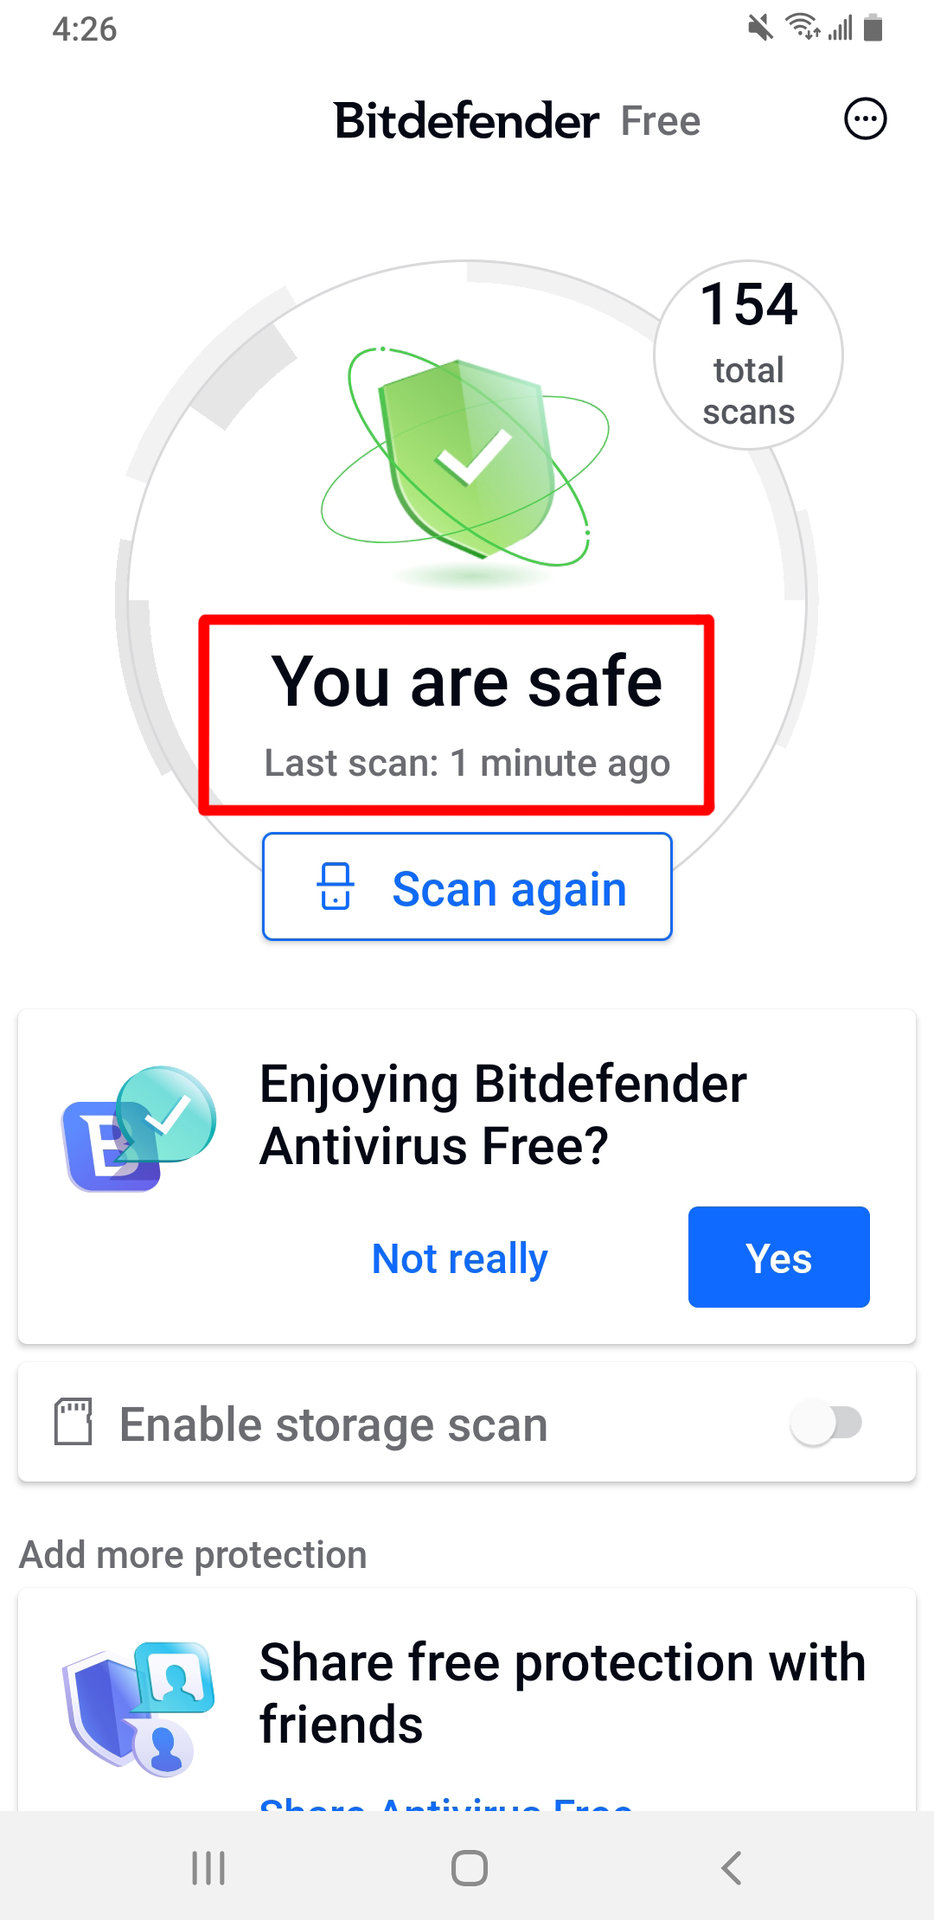 An Android Anti Malware Scanning app stating "You are safe" after finishing a safe.